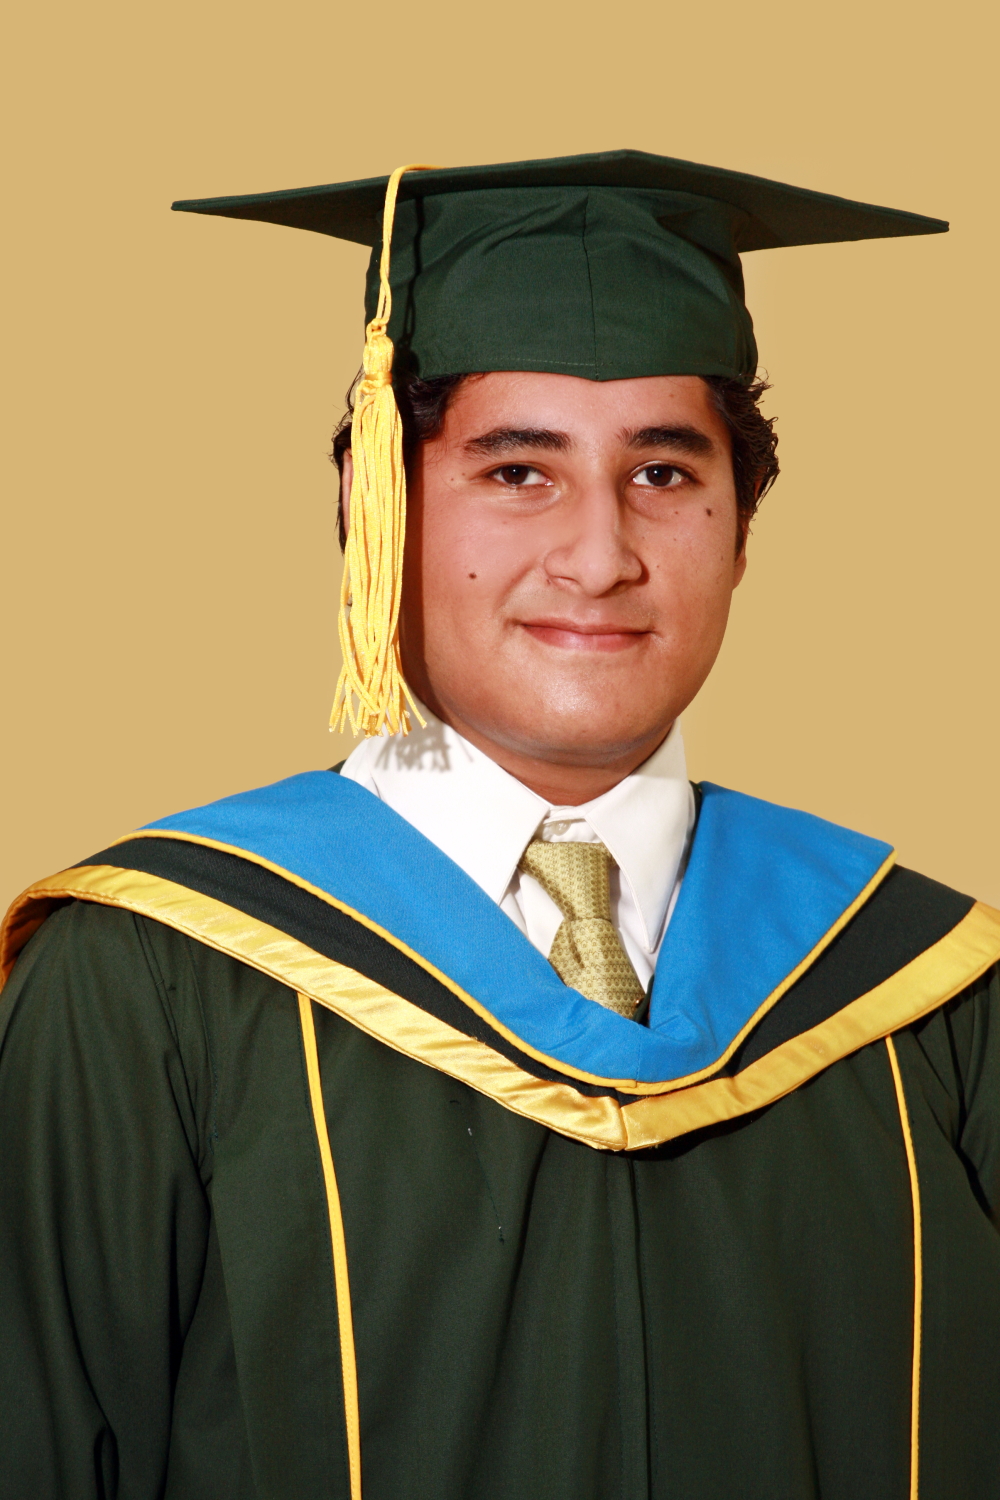 a man in a green graduation cap and gown